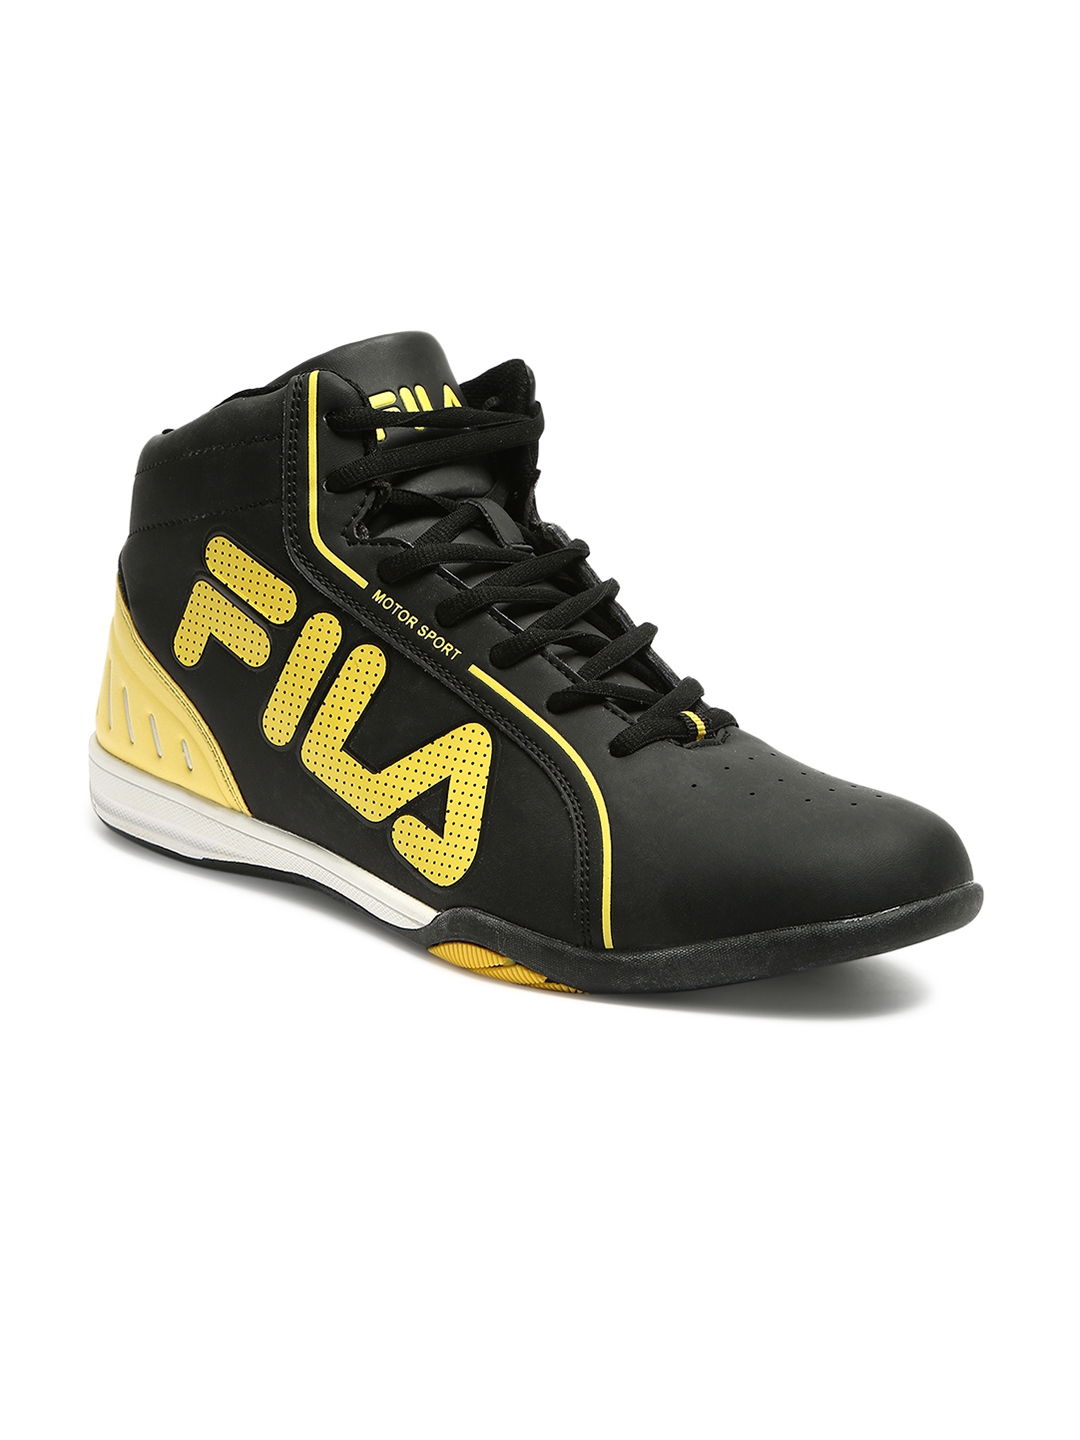 black and yellow fila shoes